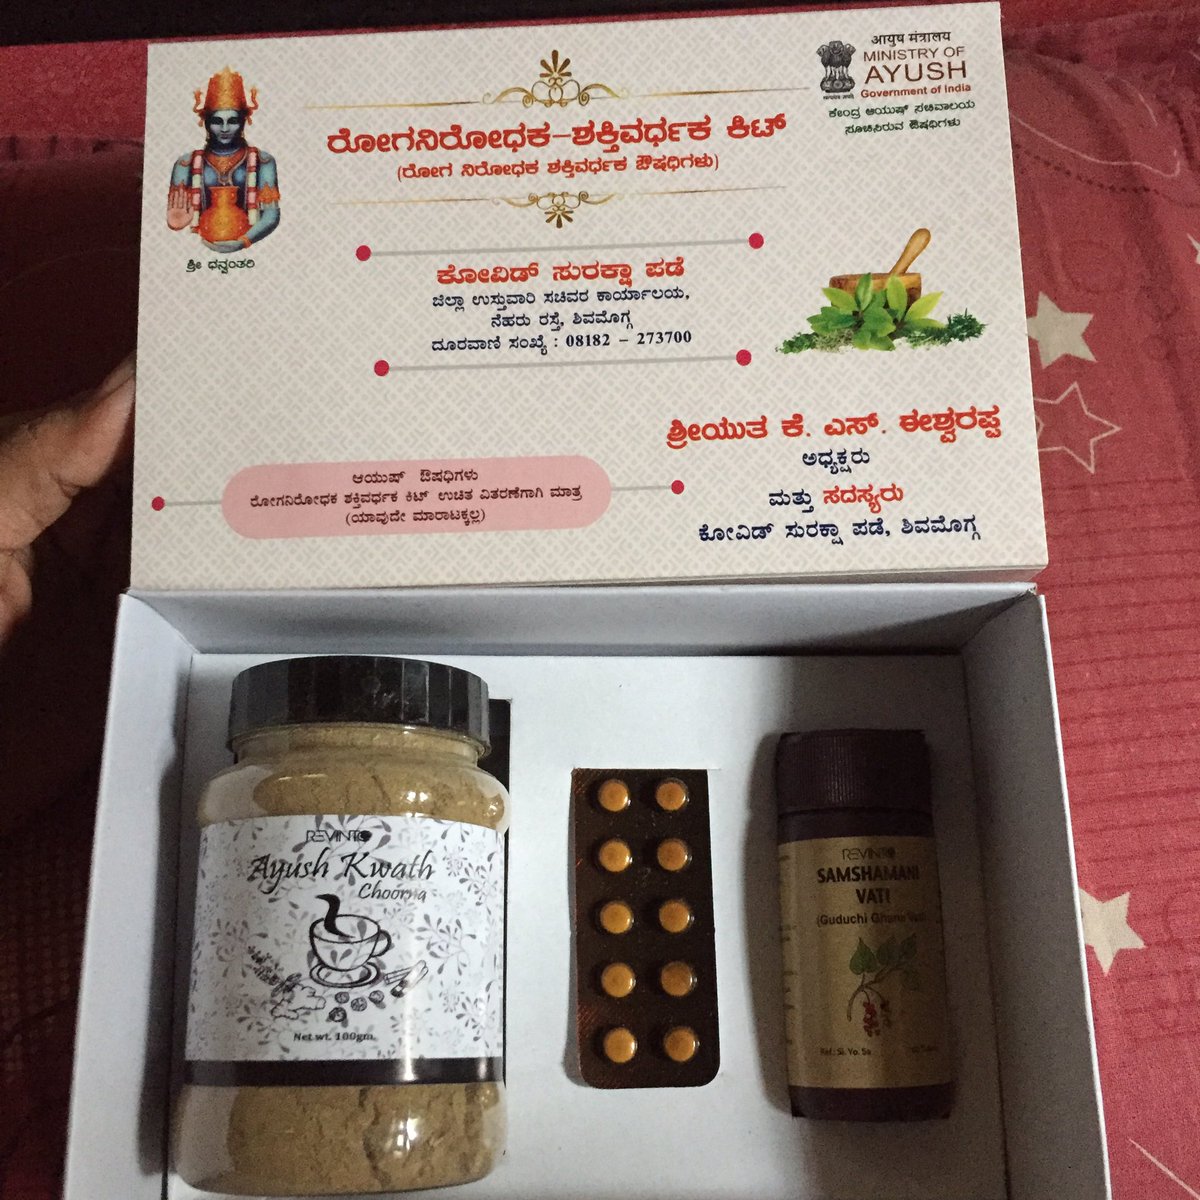 Resistance & Immunity Booster #Ayurveda kit by our #MLA @ikseshwarappa ... Distributed a free kit to all #shimoga #residents to fight against #COVID19karnataka What a farsightedness.. #thankyou sir for your great concerns and responsibility.. The precious one..🙏🙏 #1stinIndia